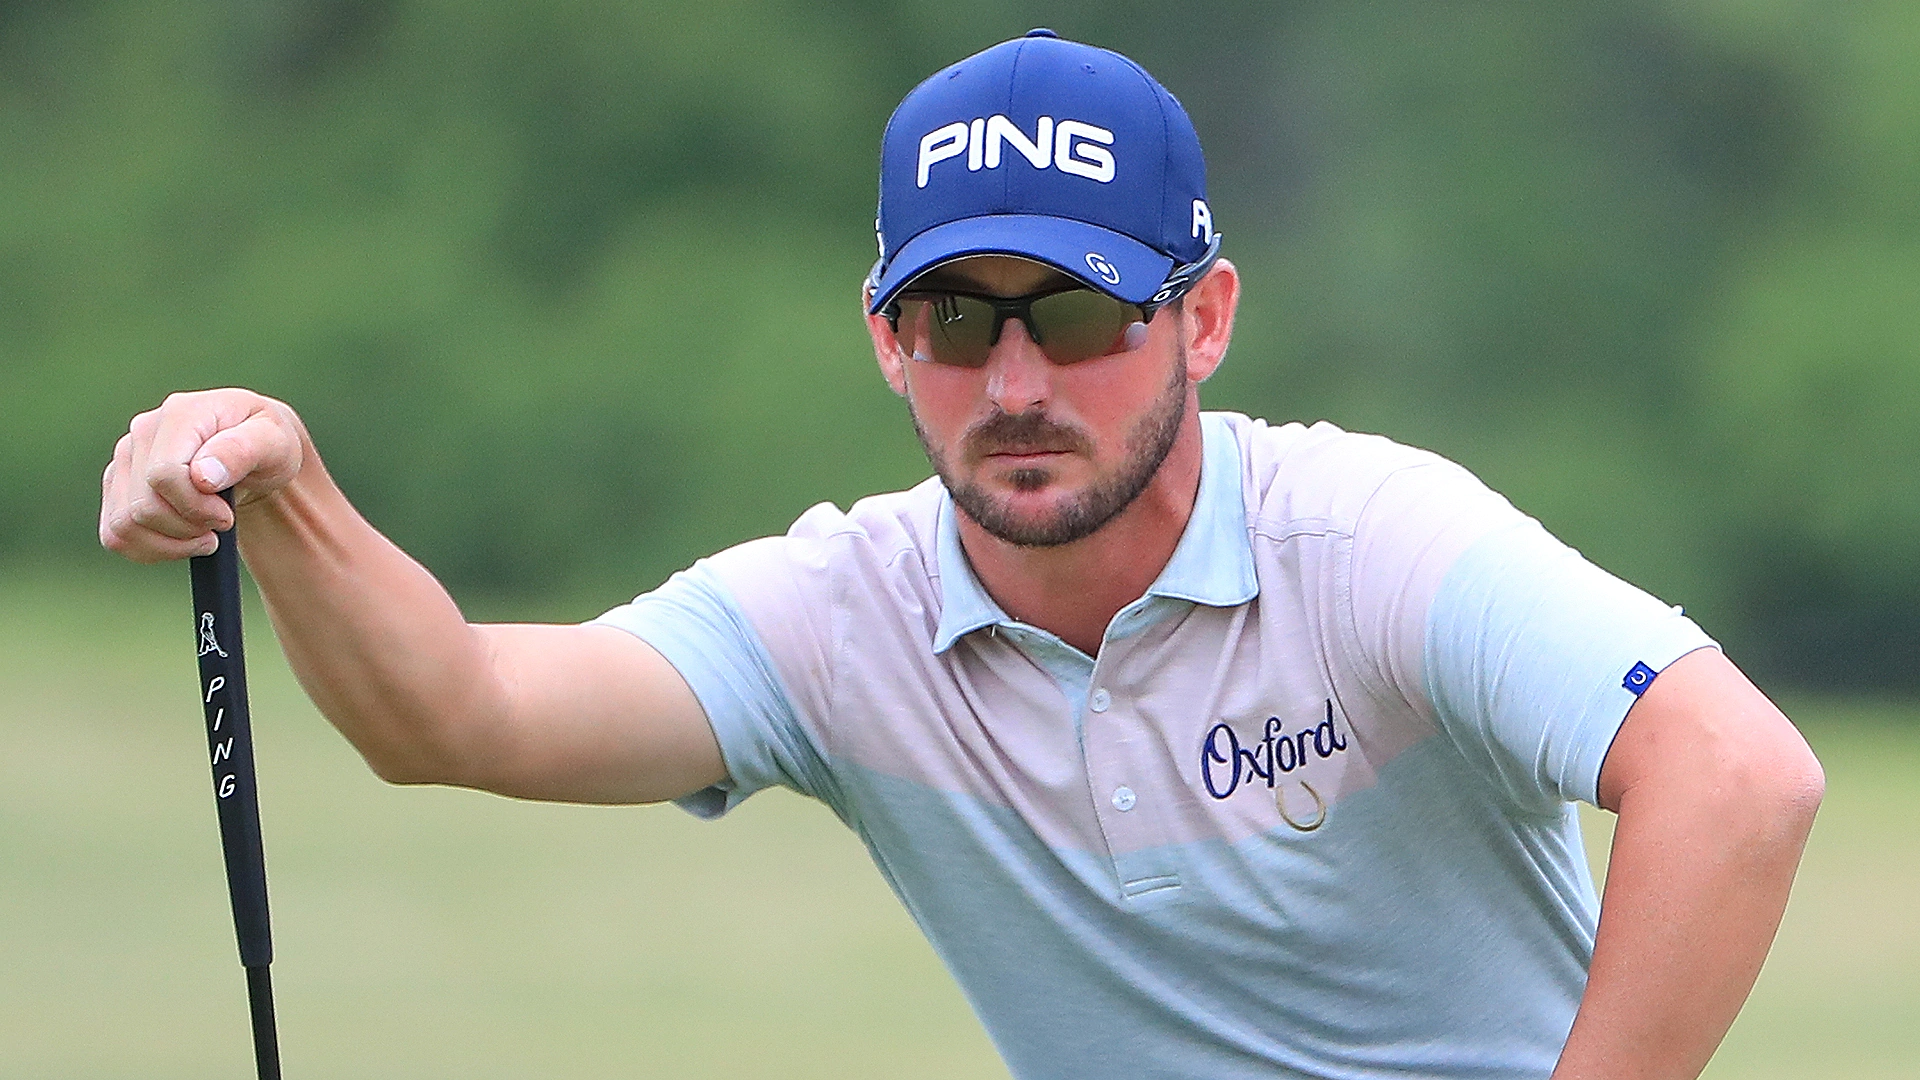 Landry reaches OWGR career high after Valero win